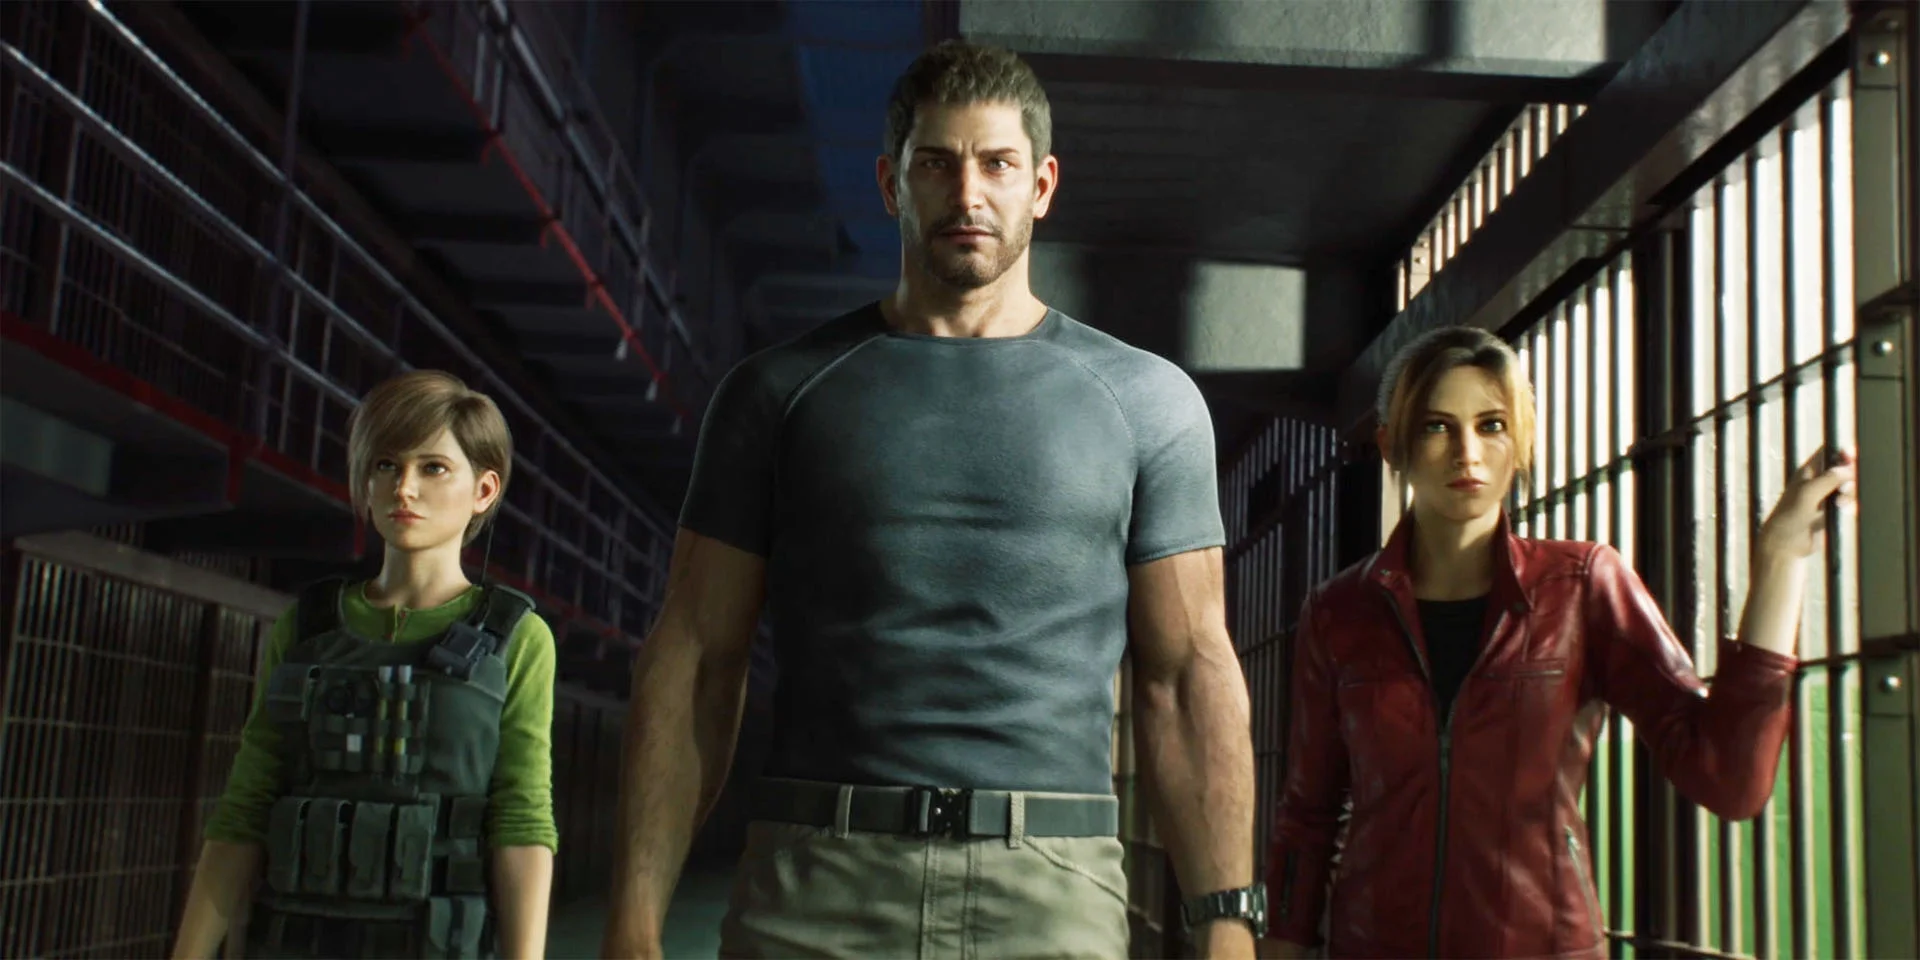 Animated film based on Resident Evil received a trailer and a release date